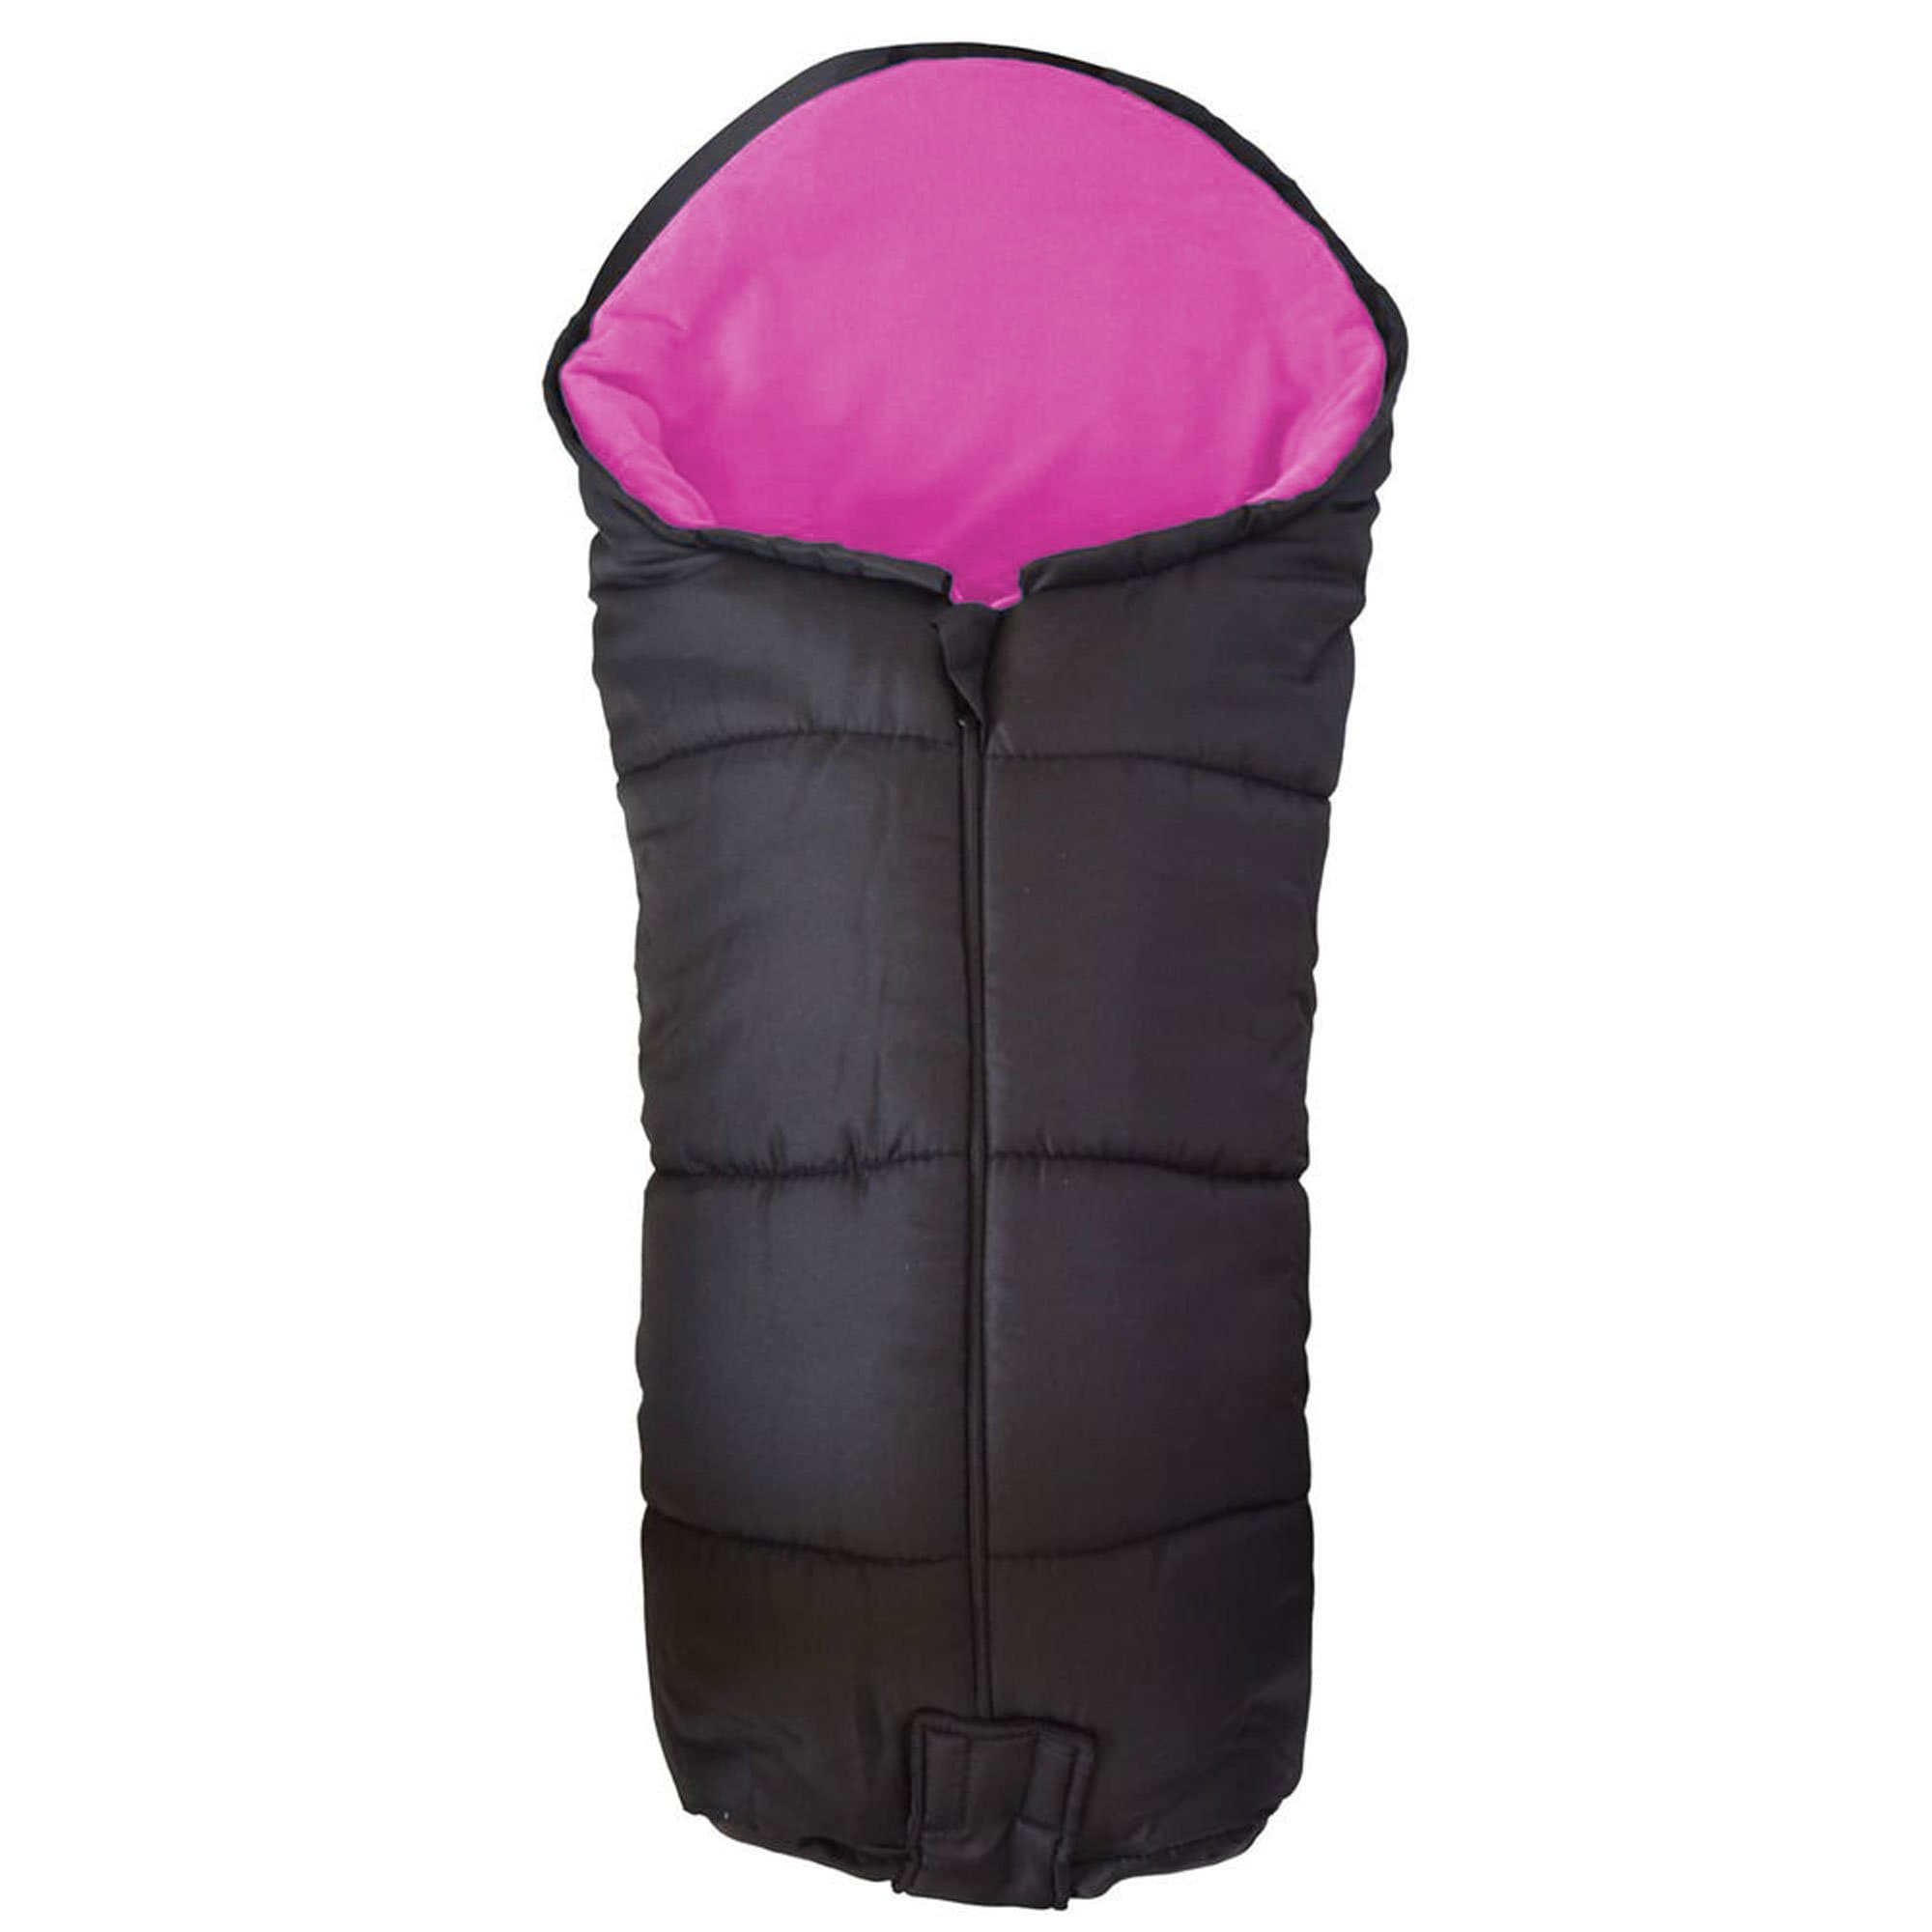 Deluxe Footmuff / Cosy Toes Compatible with Kiddicouture - Pink / Fits All Models | For Your Little One